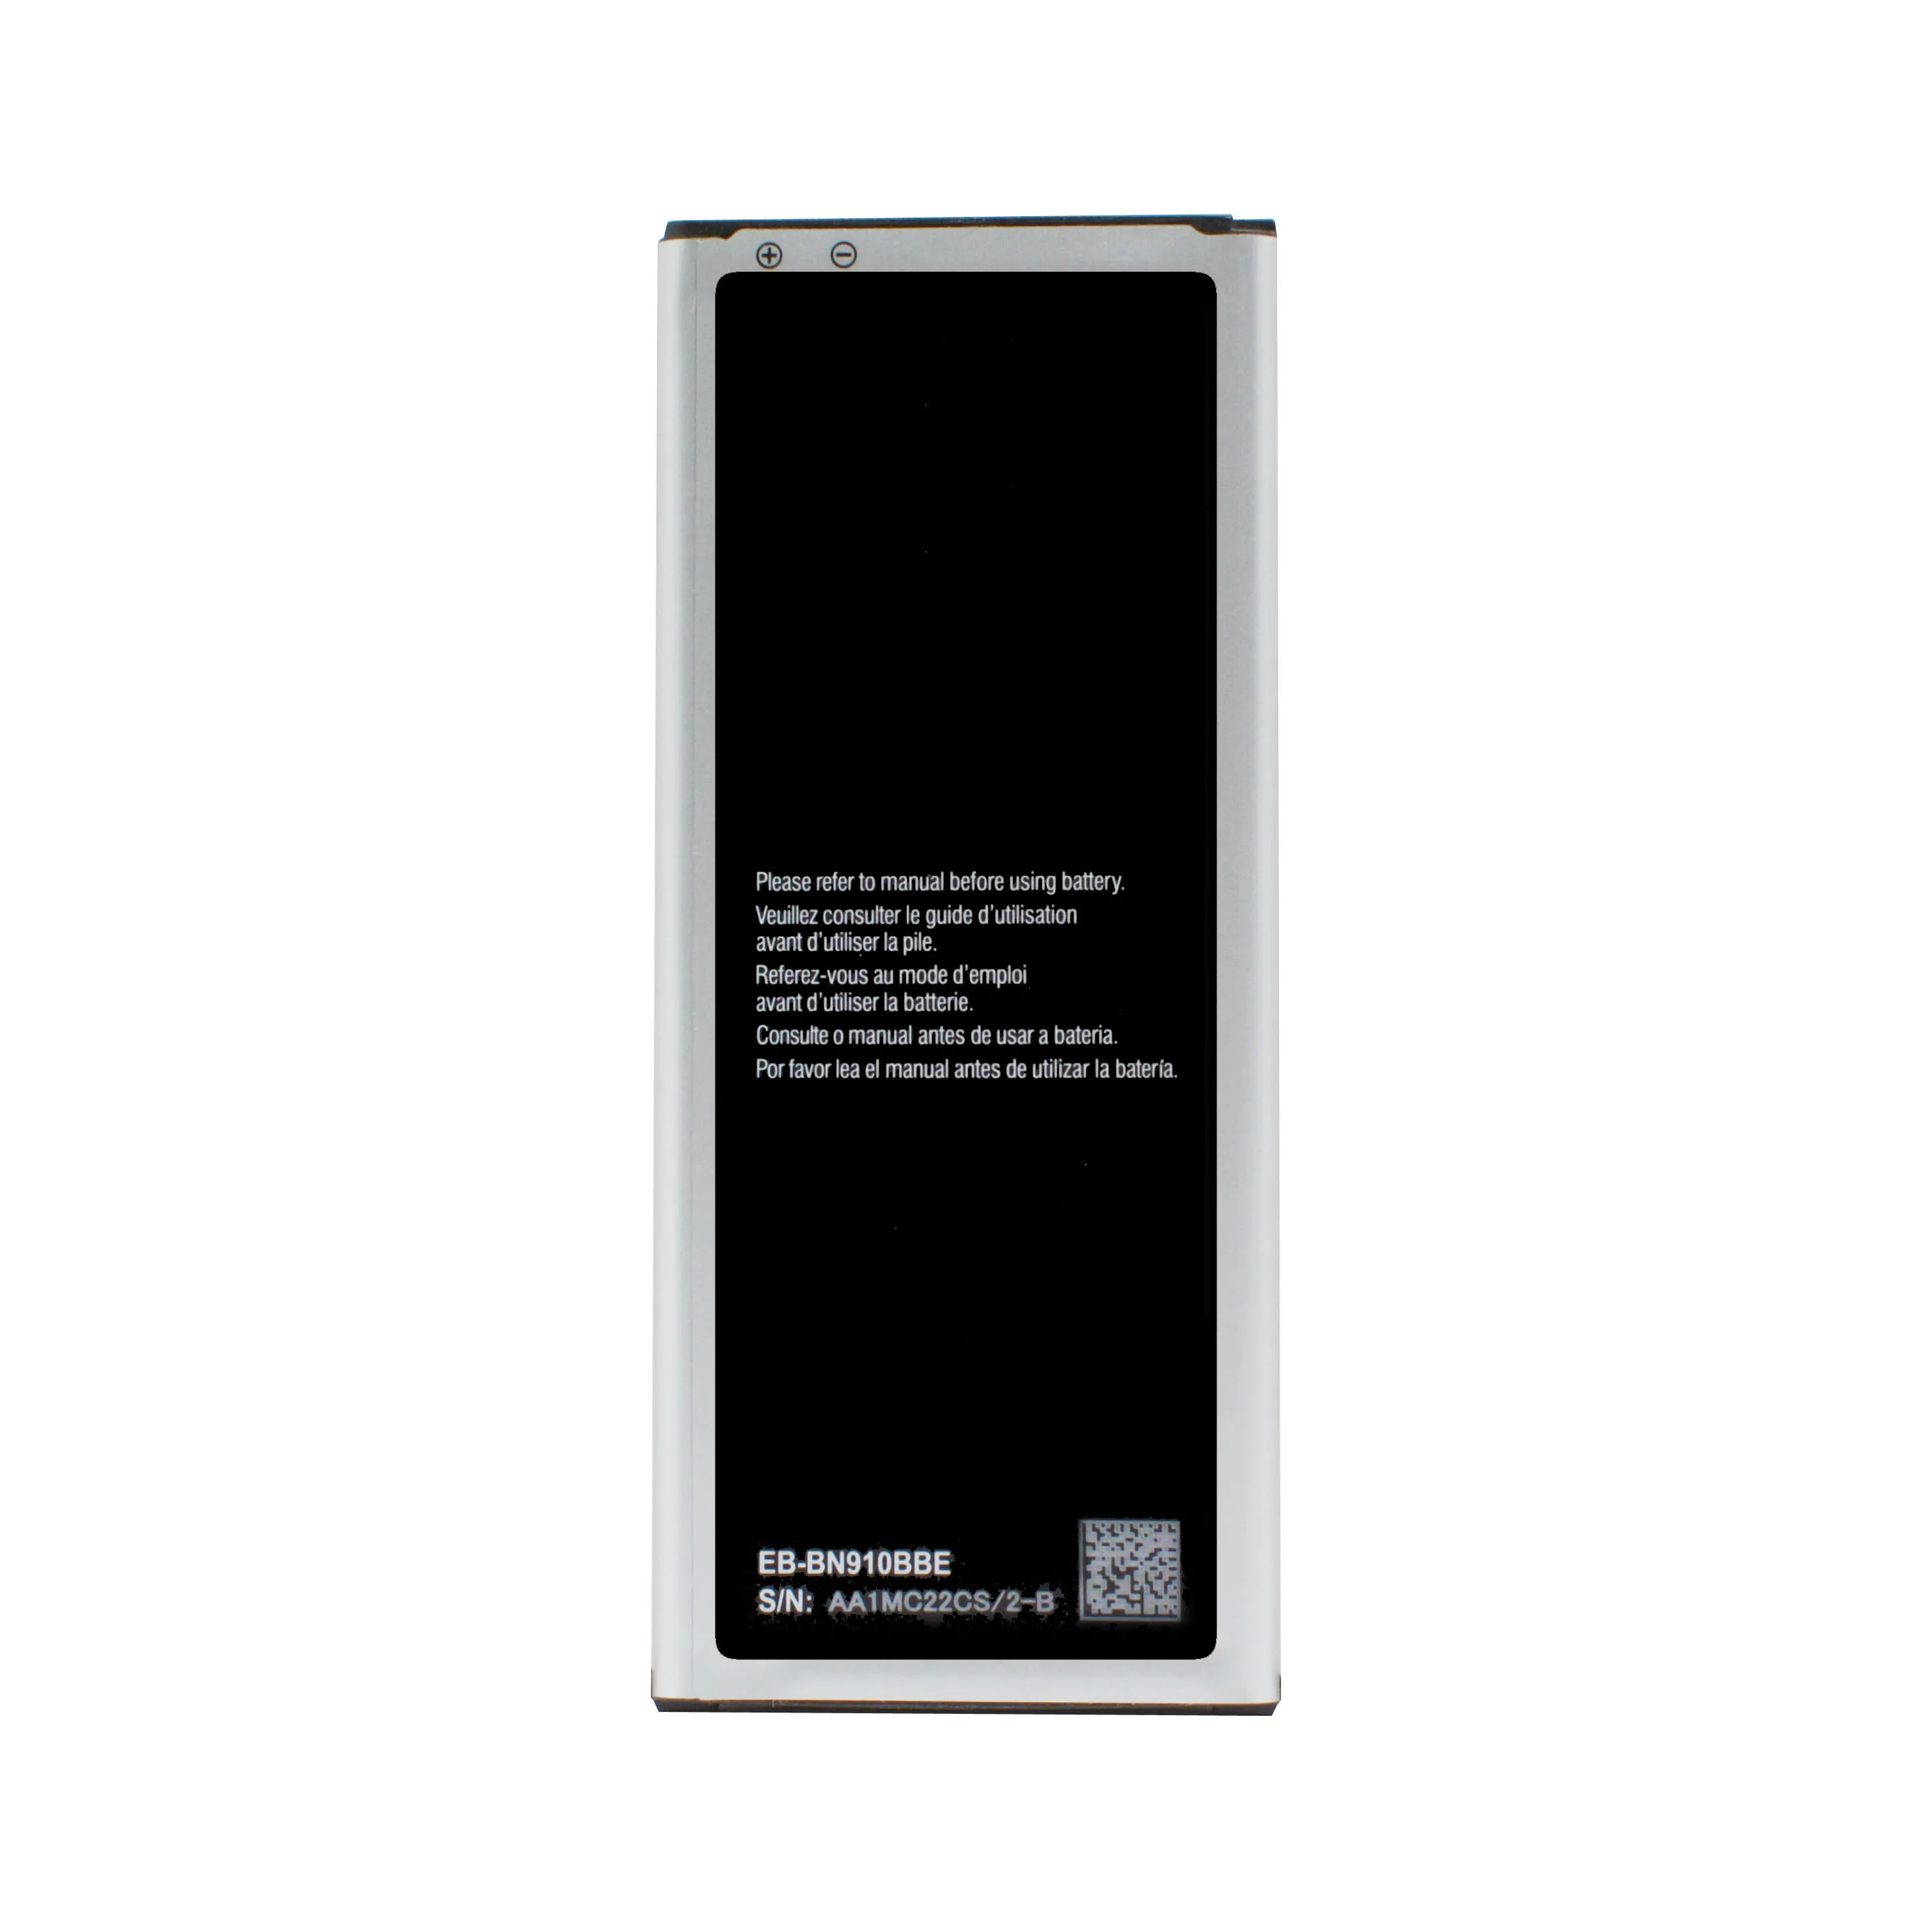 

EB-BN910BBE For Samsung Galaxy Note4 3220mAh Replacement Battery Iv N910 N AKKu DDP Service High Capacity Made in China, Black